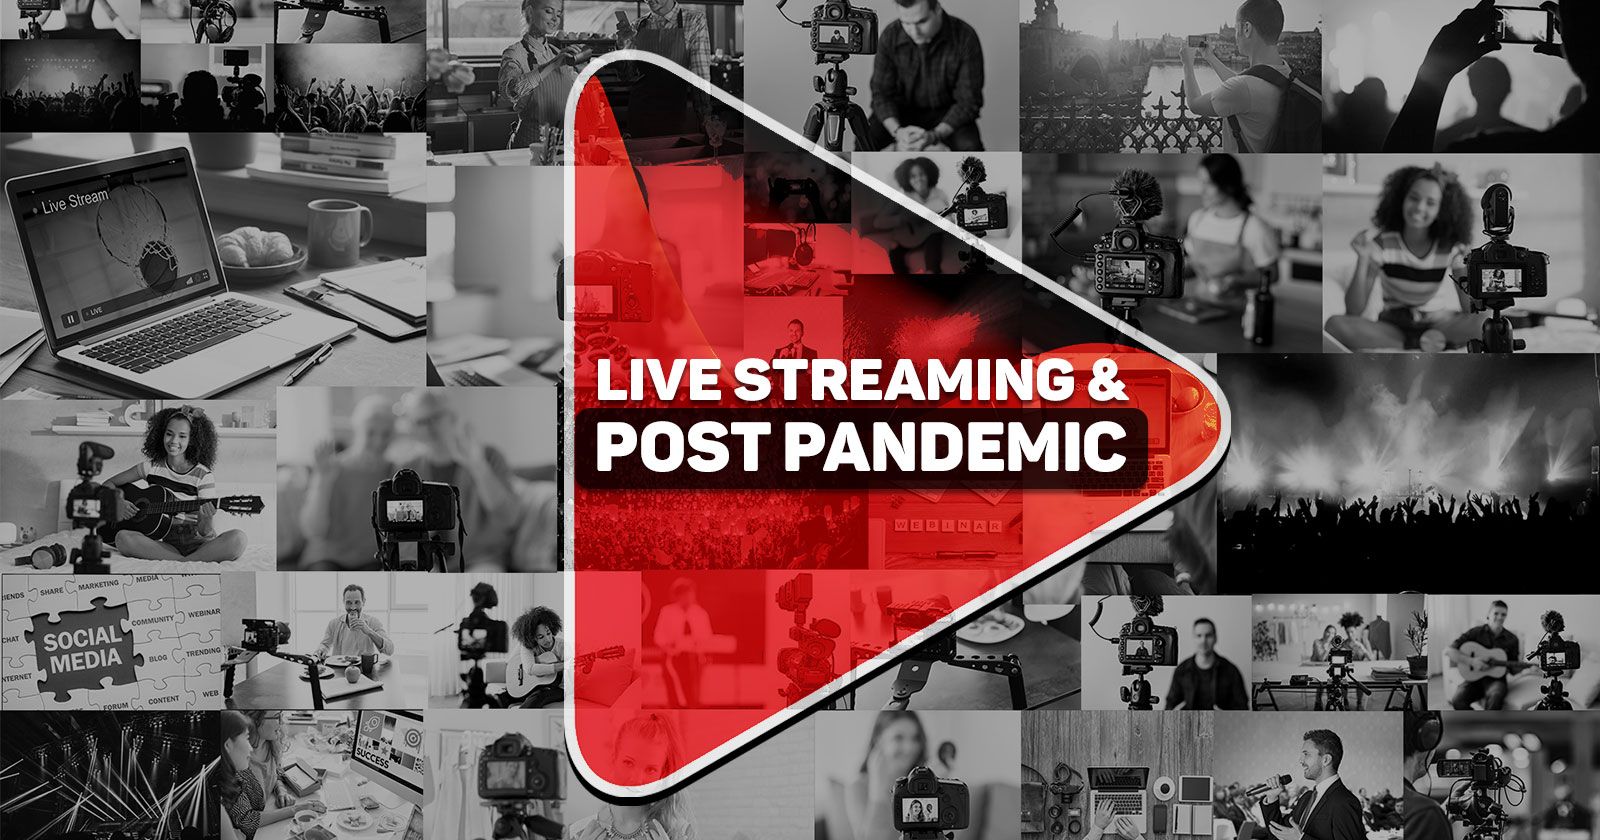 Live Streaming is Here to Stay Even Post-Pandemic